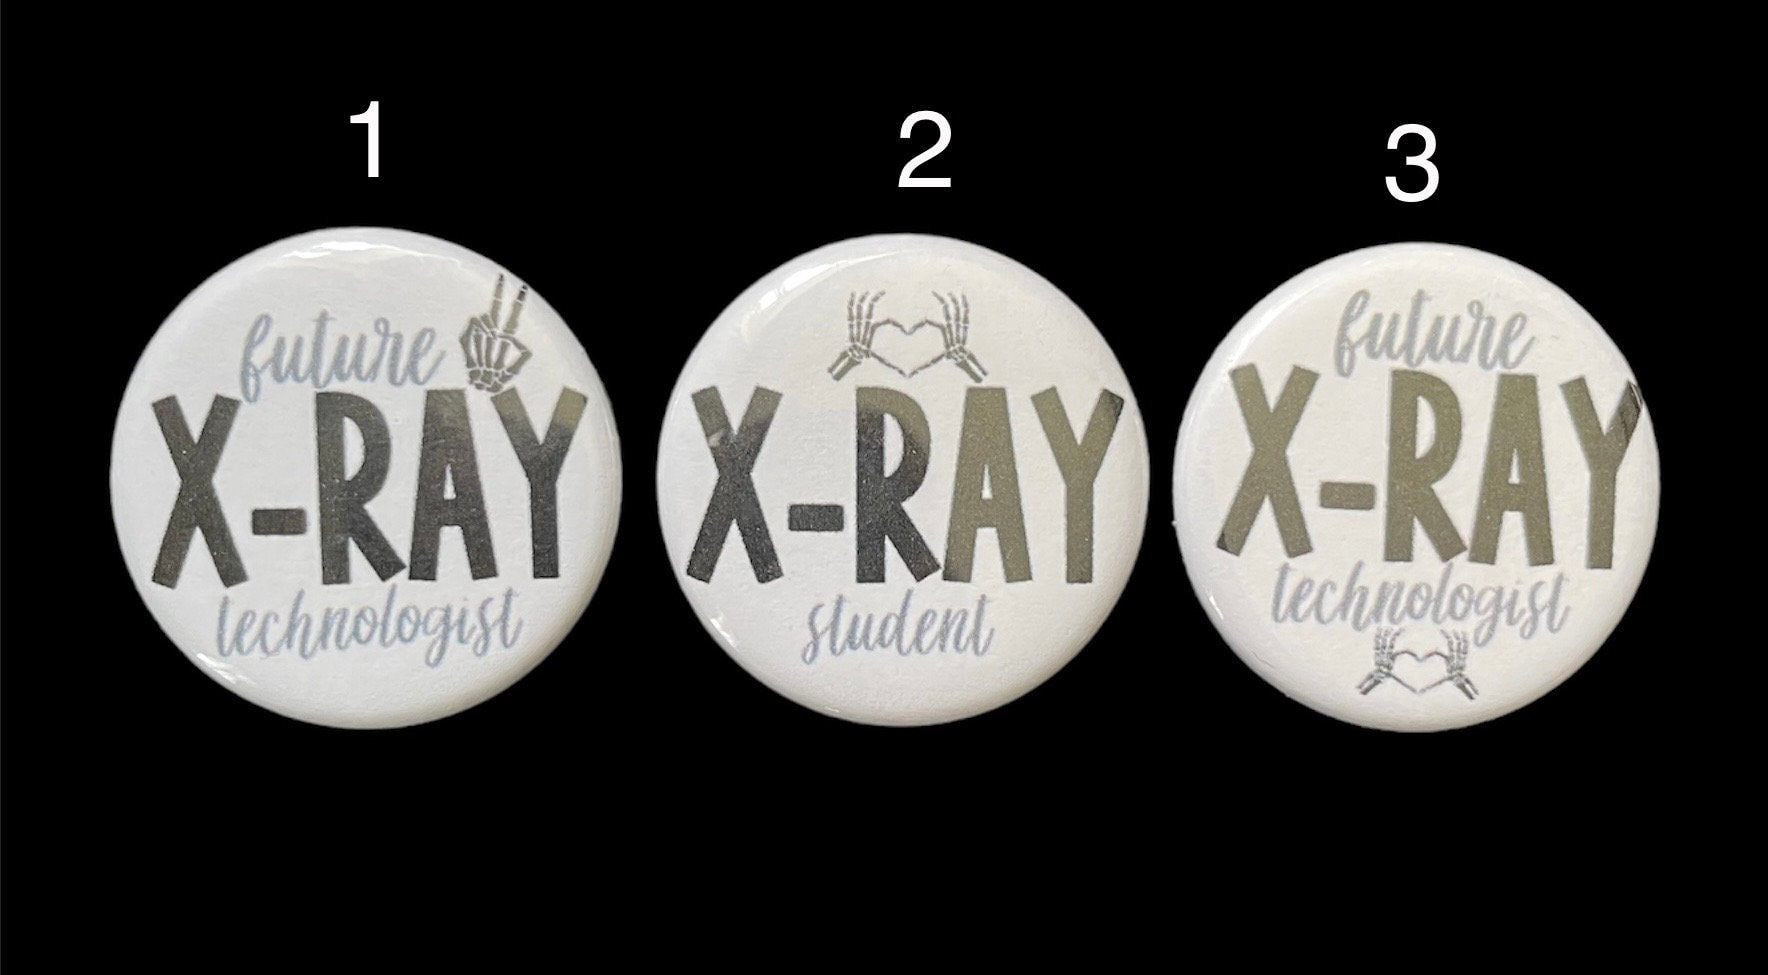 Student Xray Tech Bundle, Xray Markers, Large Rectangle, Badge Reel, Marker Holder, Radhesive, Radiology, Clinical